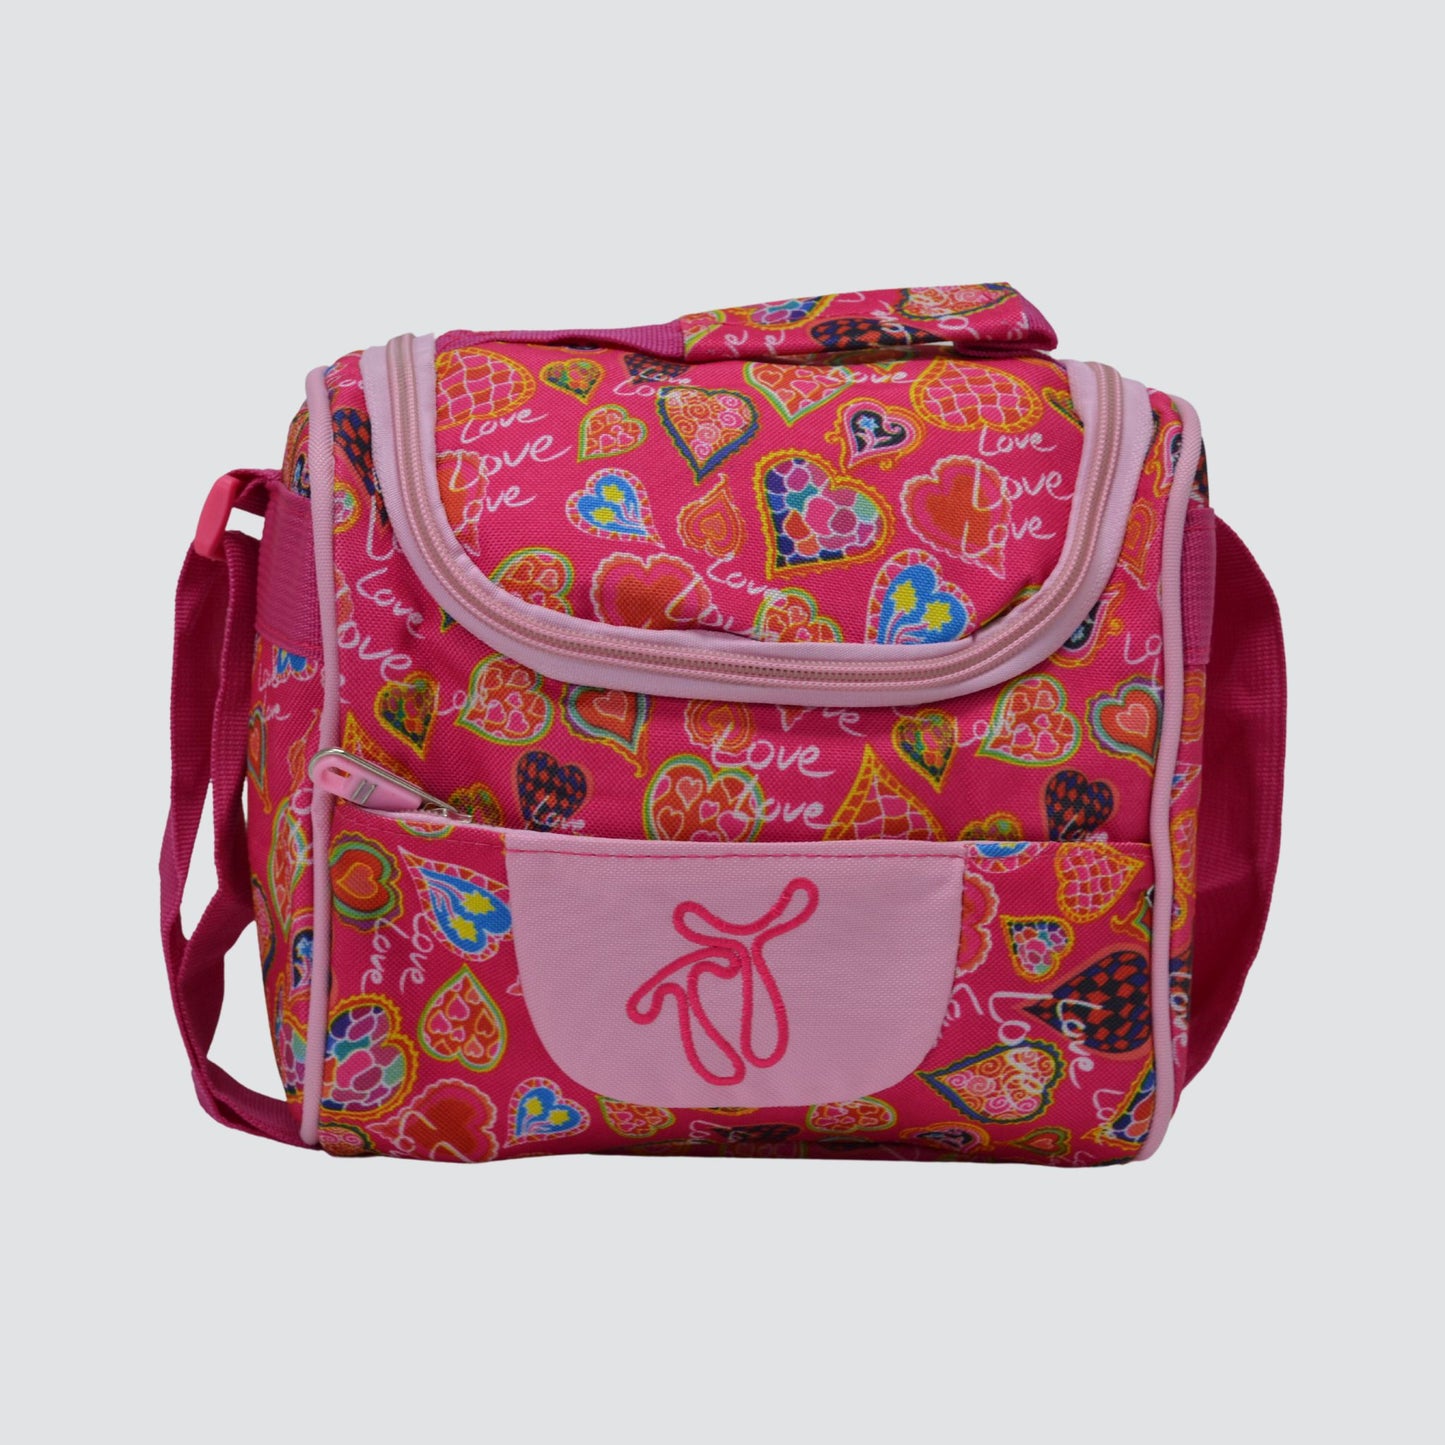 A1607 Multi-Print Girls Insulated Lunch Bag